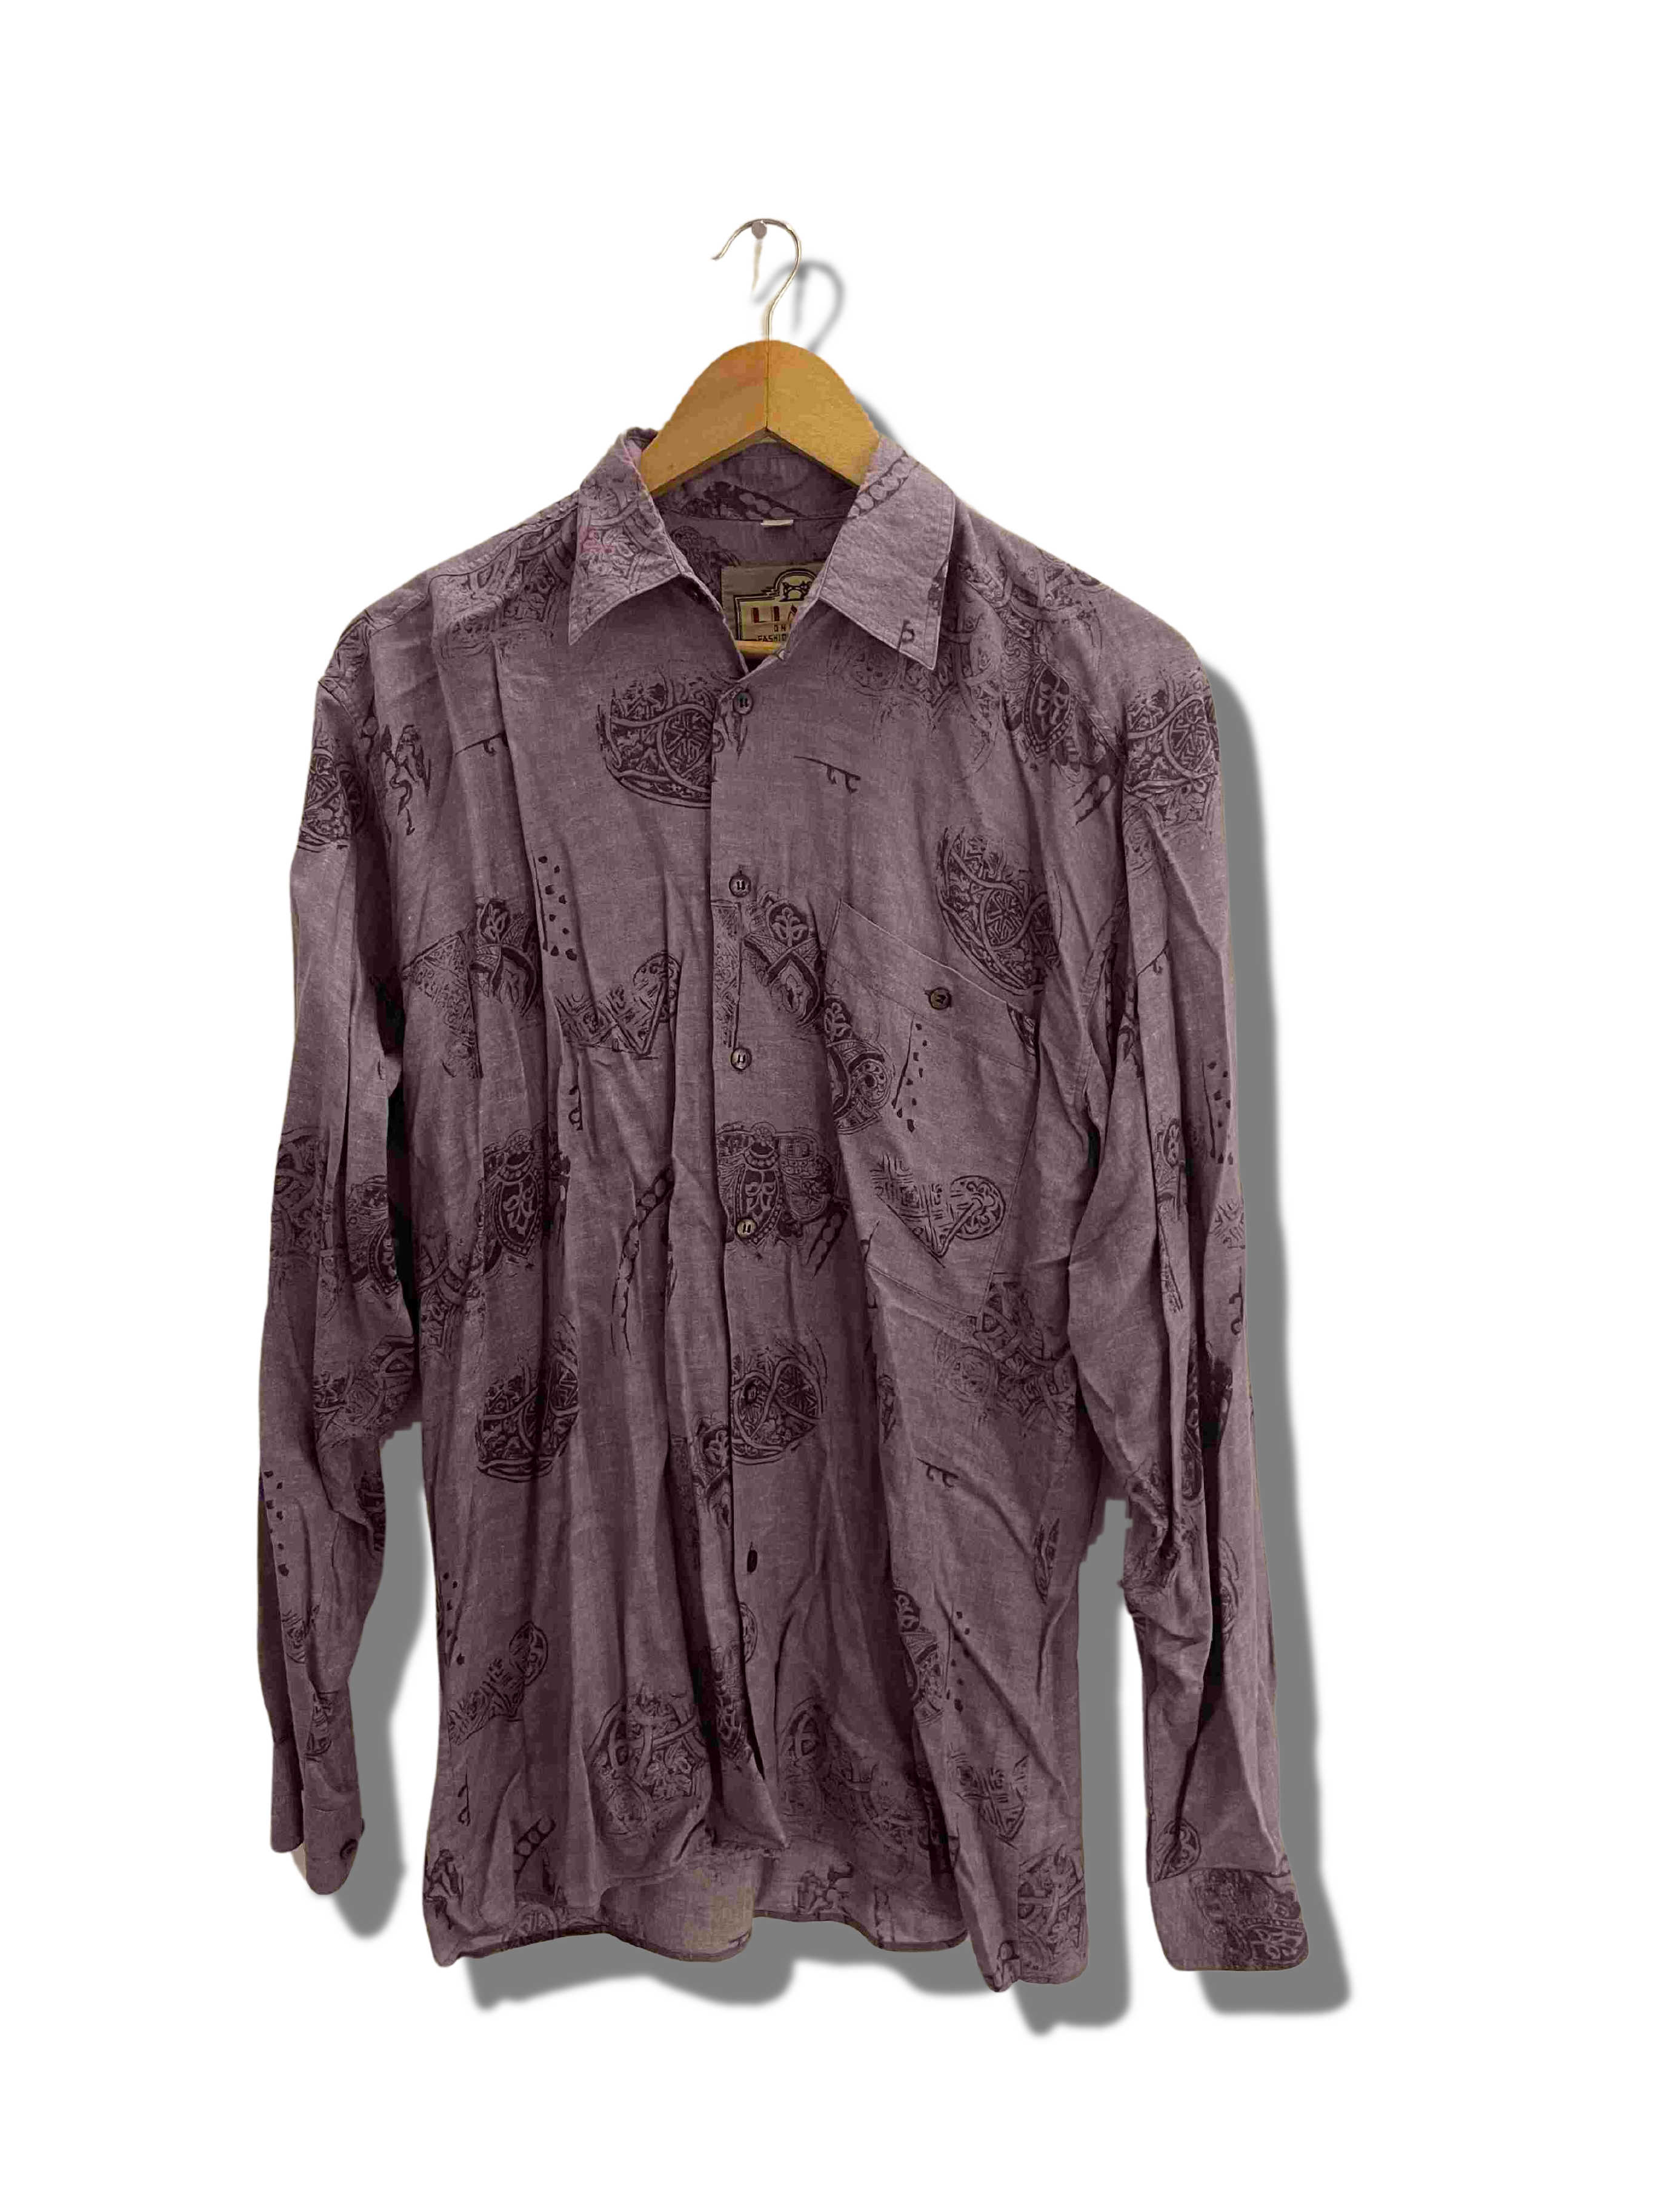 Vintage Limit purple abstract pattern small long sleeve shirt 